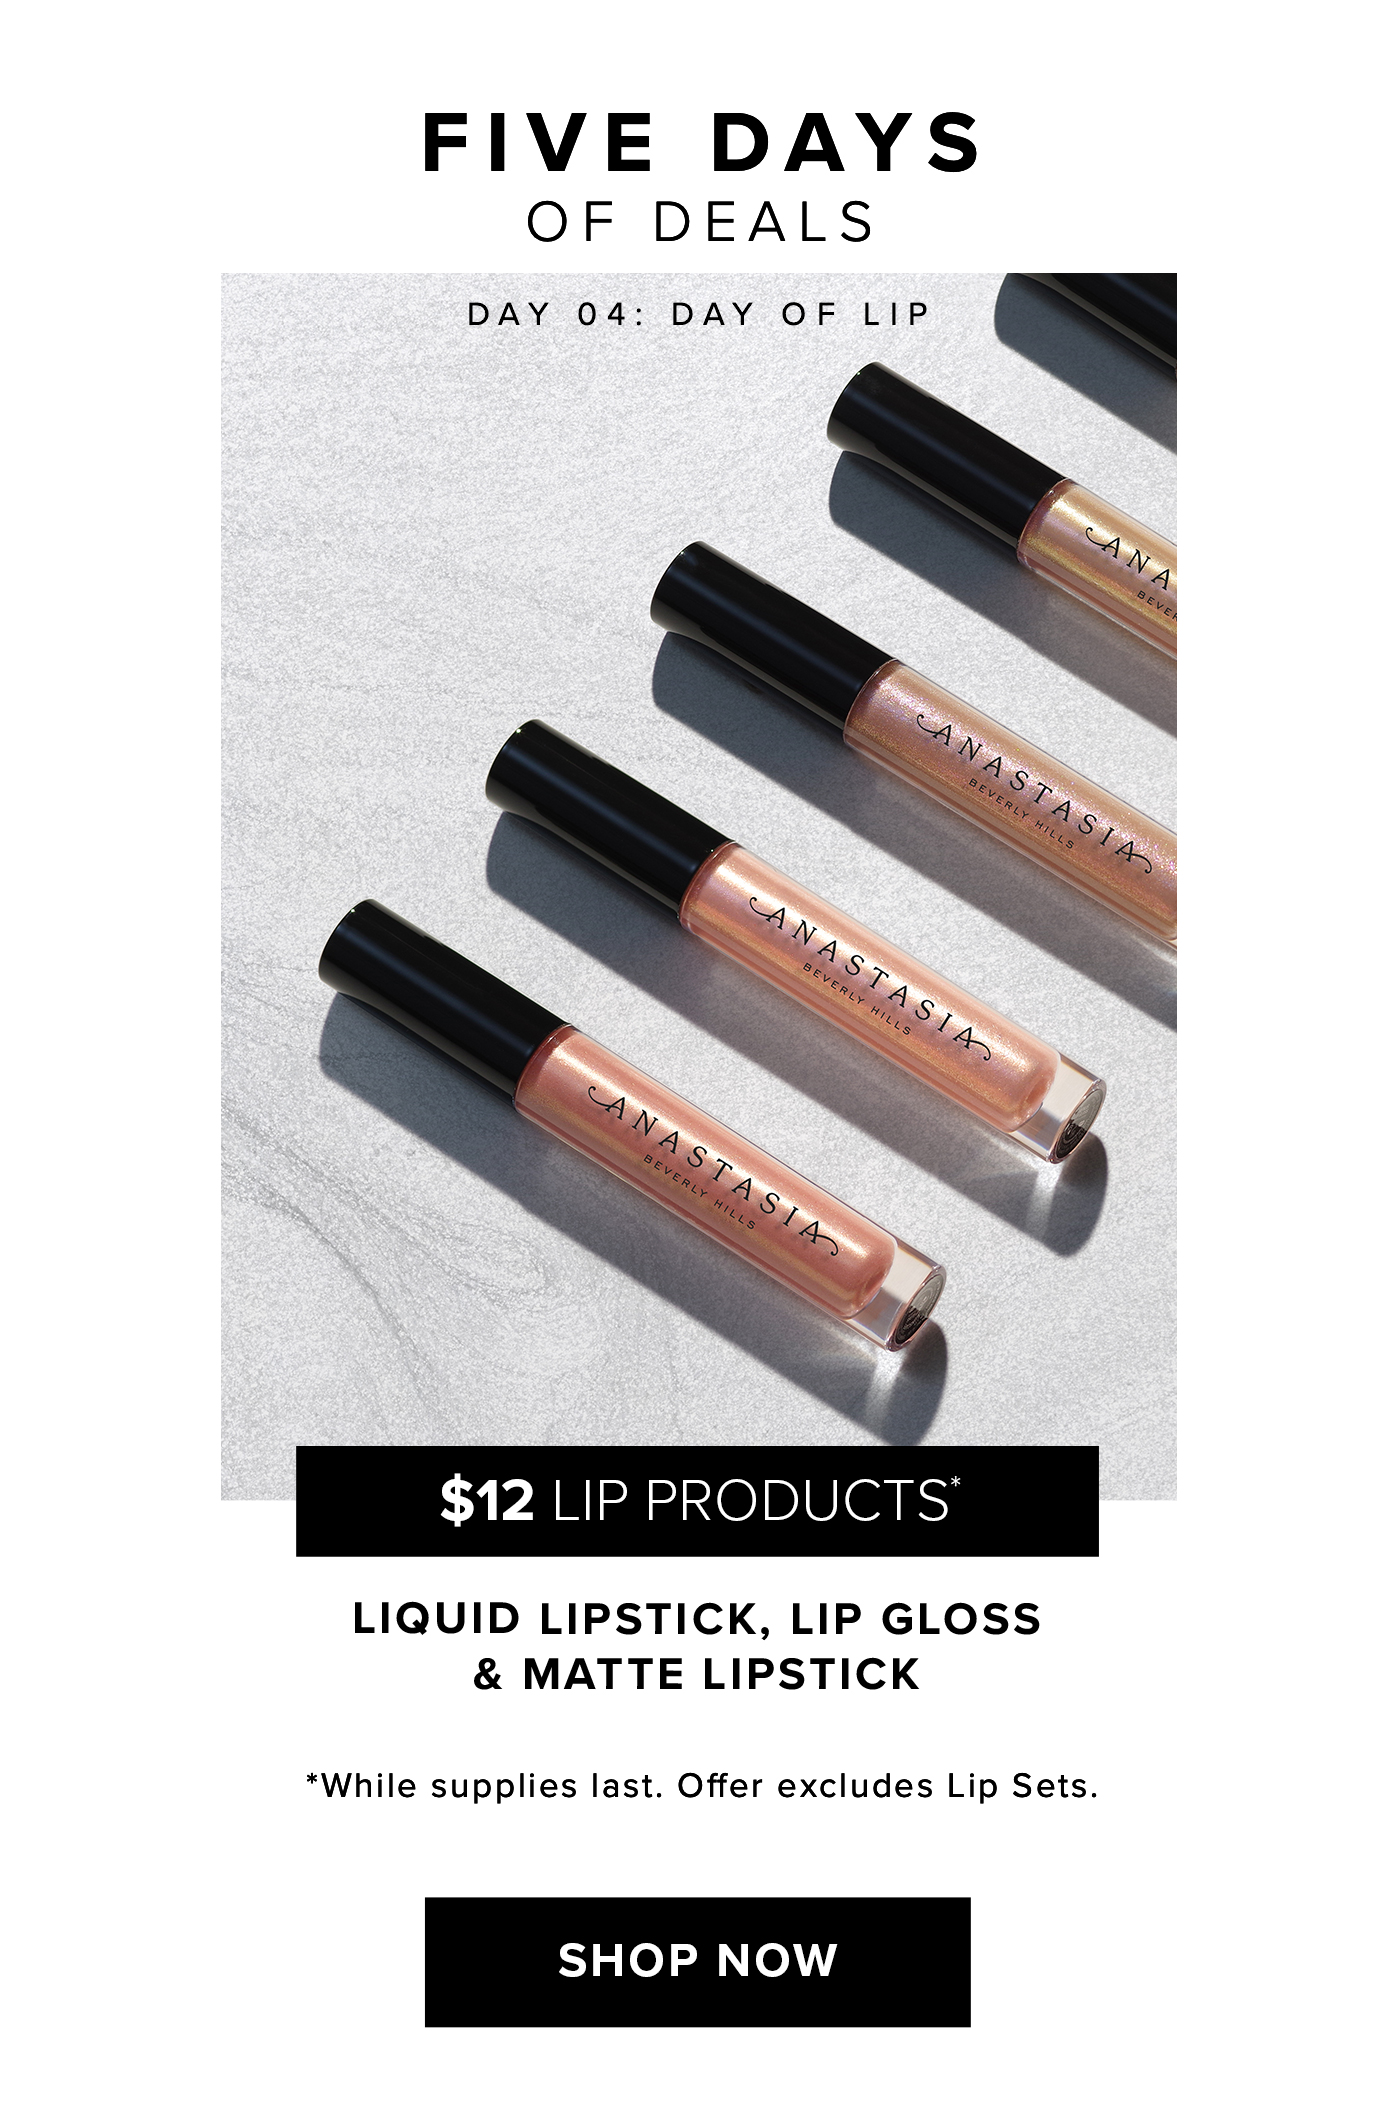 FIVE DAYS OF DEALS DAY 04: DAY OF LIP. $12 LIP PRODUCTS* LIQUID LIPSTICK, LIP GLOSS & MATTE LIPSTICK. *While supplies last. Offer excludes Lip Sets. SHOP NOW